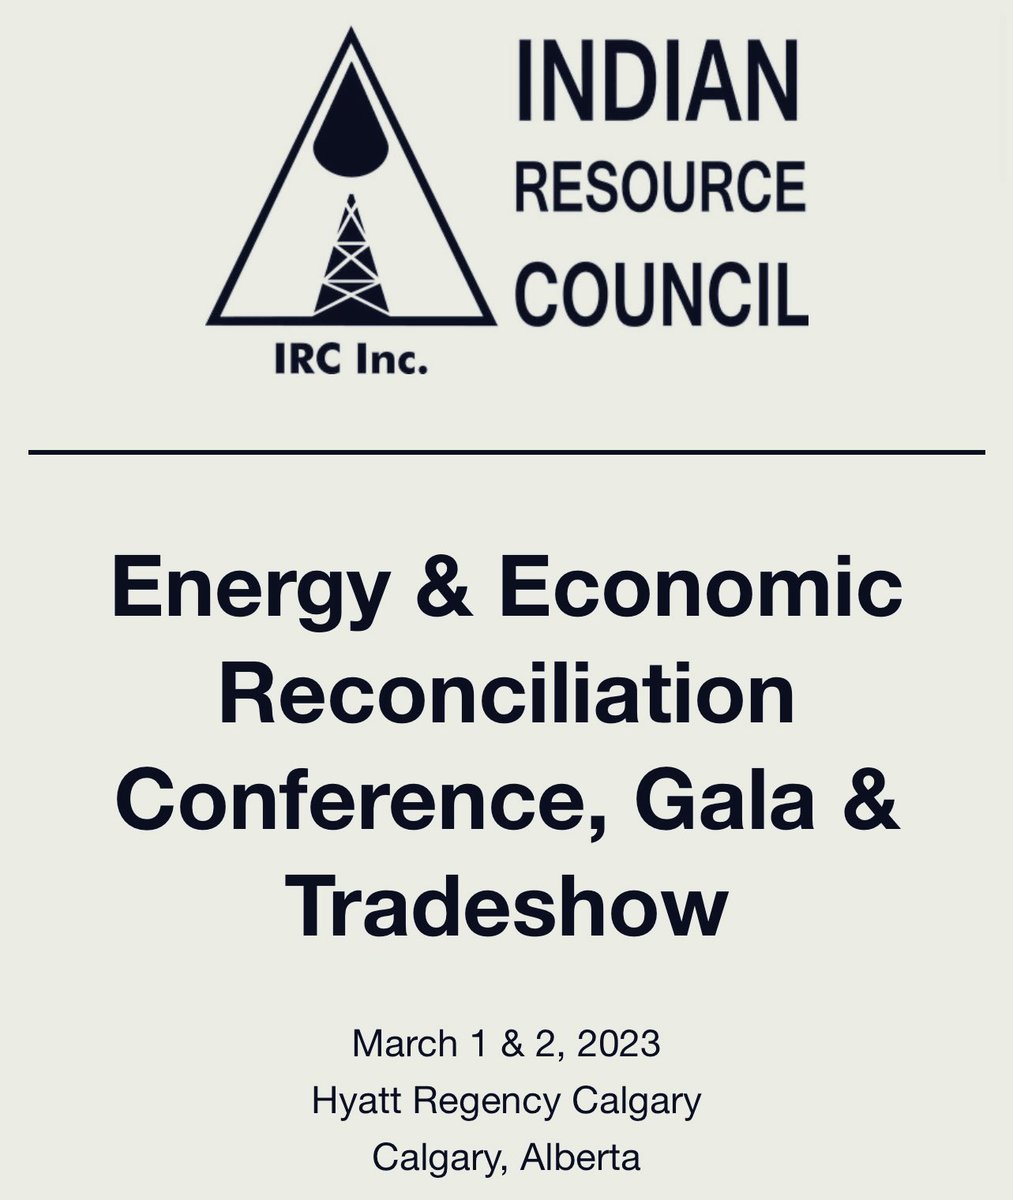 Economic Reconciliation and Energy Conference

When:   Wed, March 1st & Thurs, Mar 2nd, 2023

Where:  Hyatt Regency, Calgary, AB

Panel discussions, trade show , networking sessions and the awards gala. #Calgary #YYC #EconomicReconciliation #conference 

irccanada.ca/energyconferen…